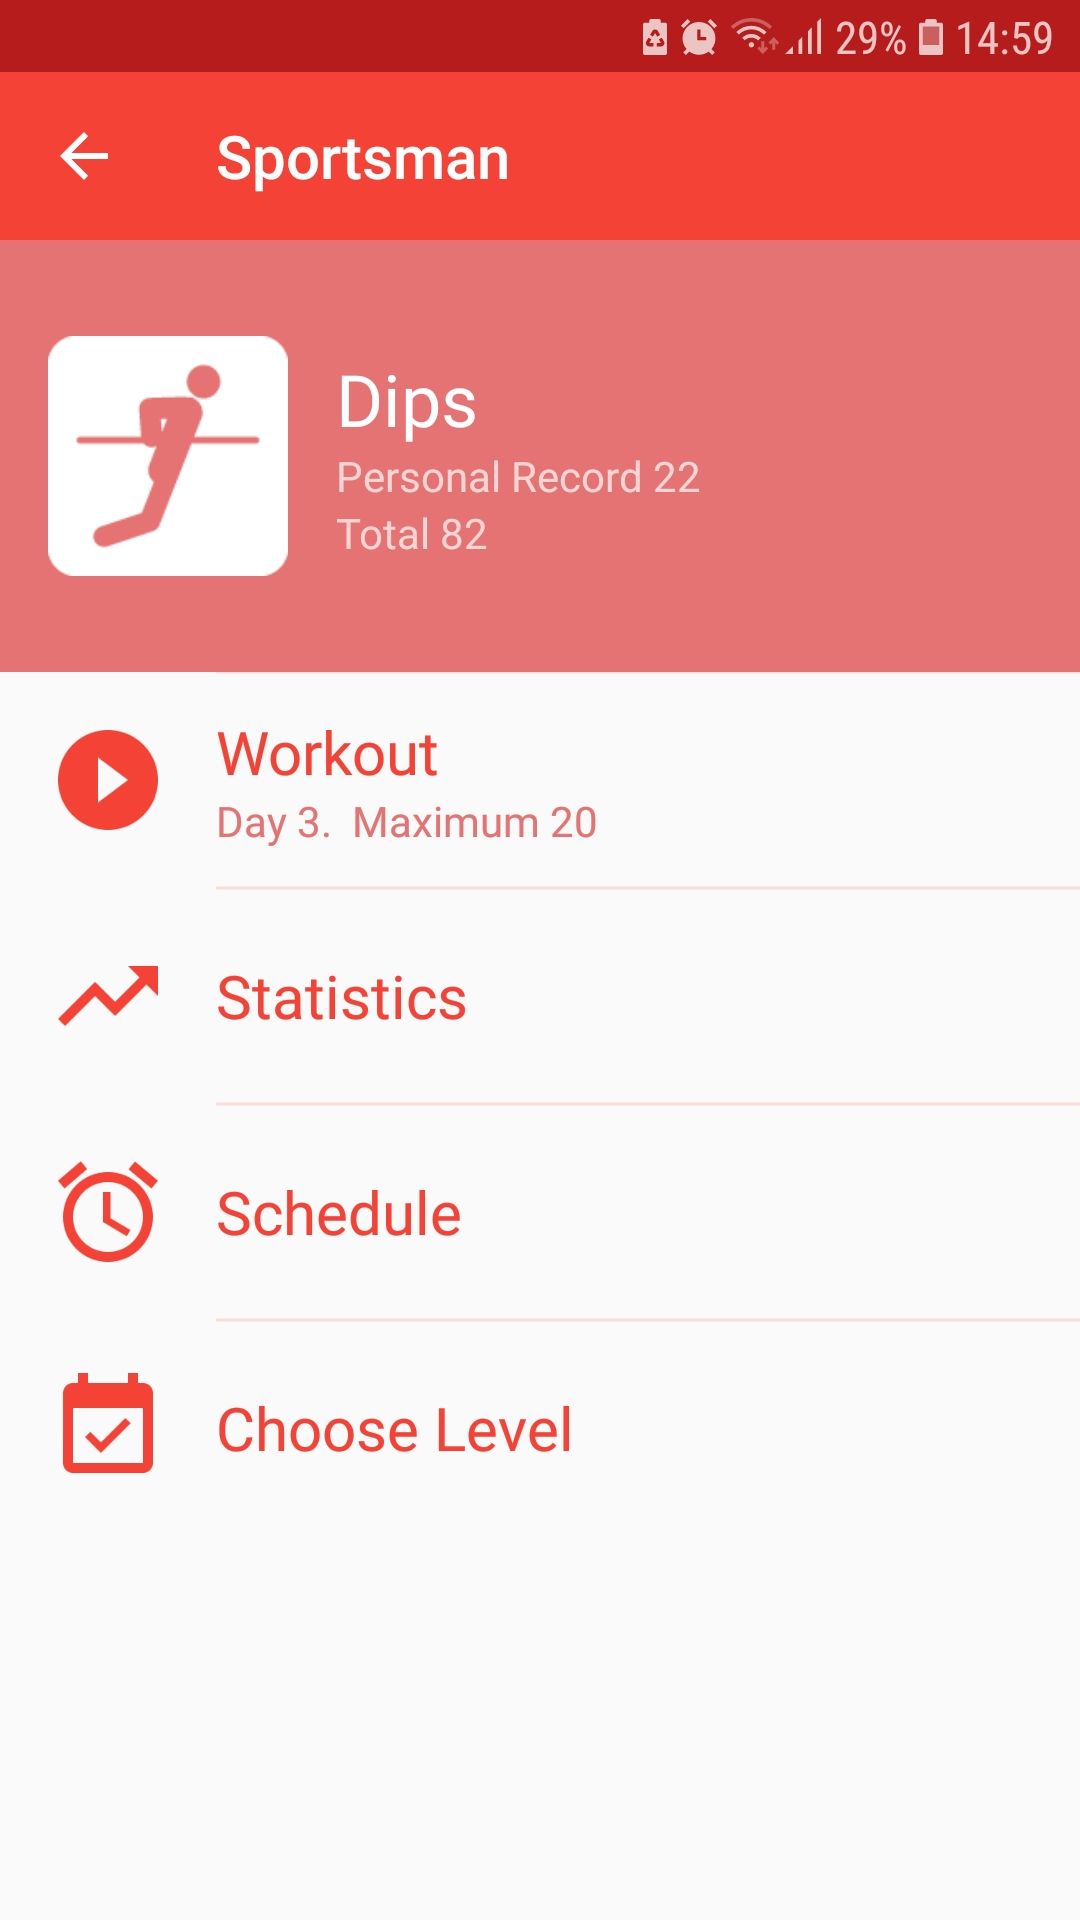 Sportsman Bodyweight Workout at Home app